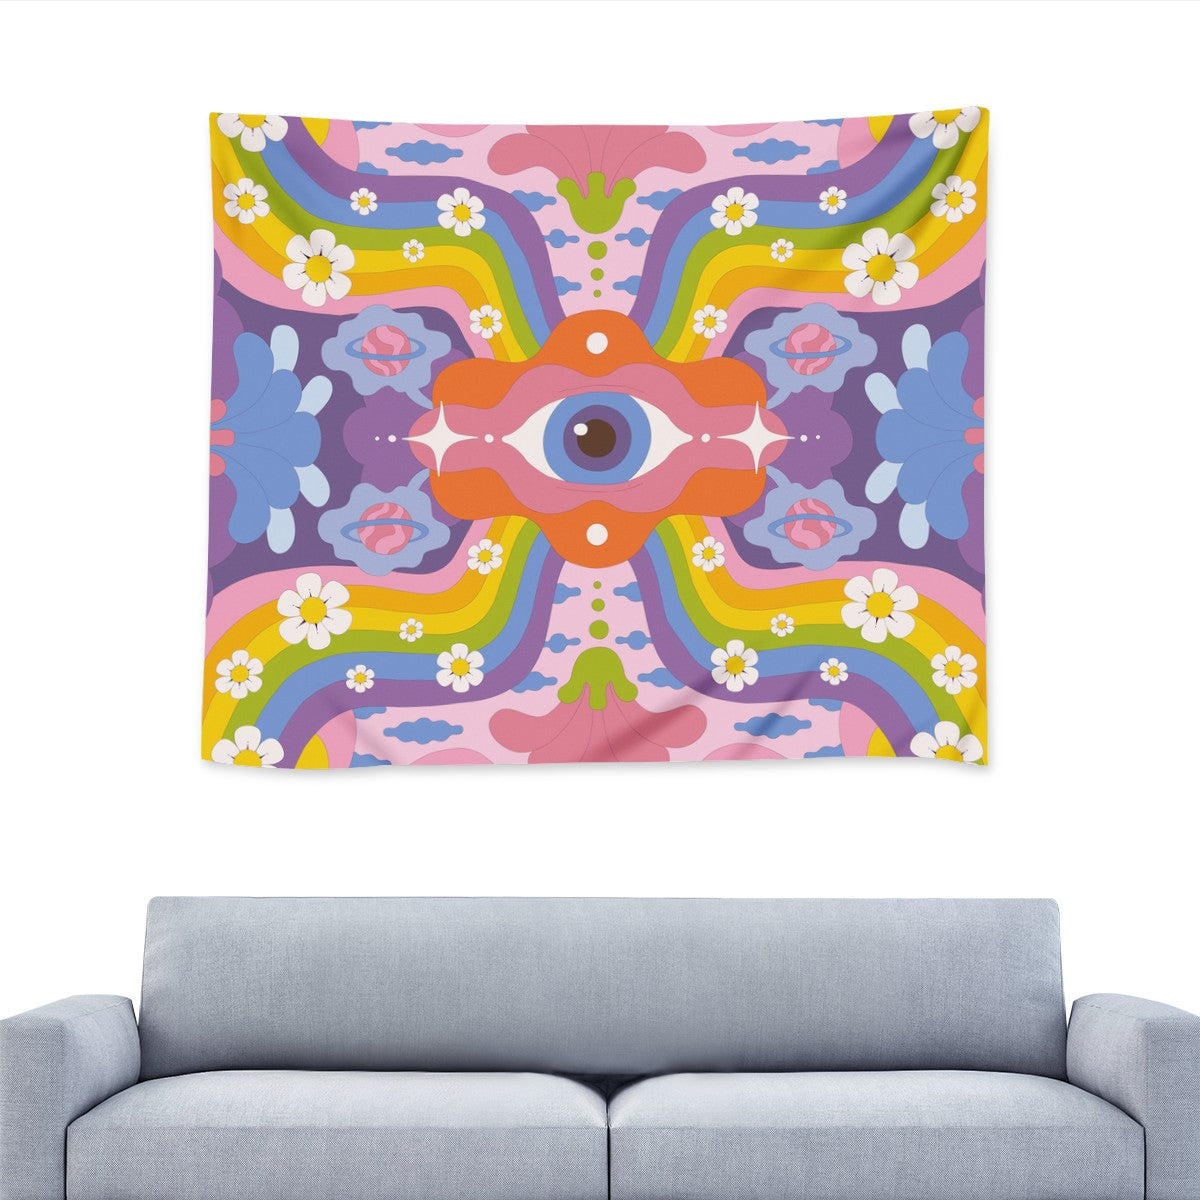 Groovy Hippie Retro Psychedelic Eye Wall Tapestry